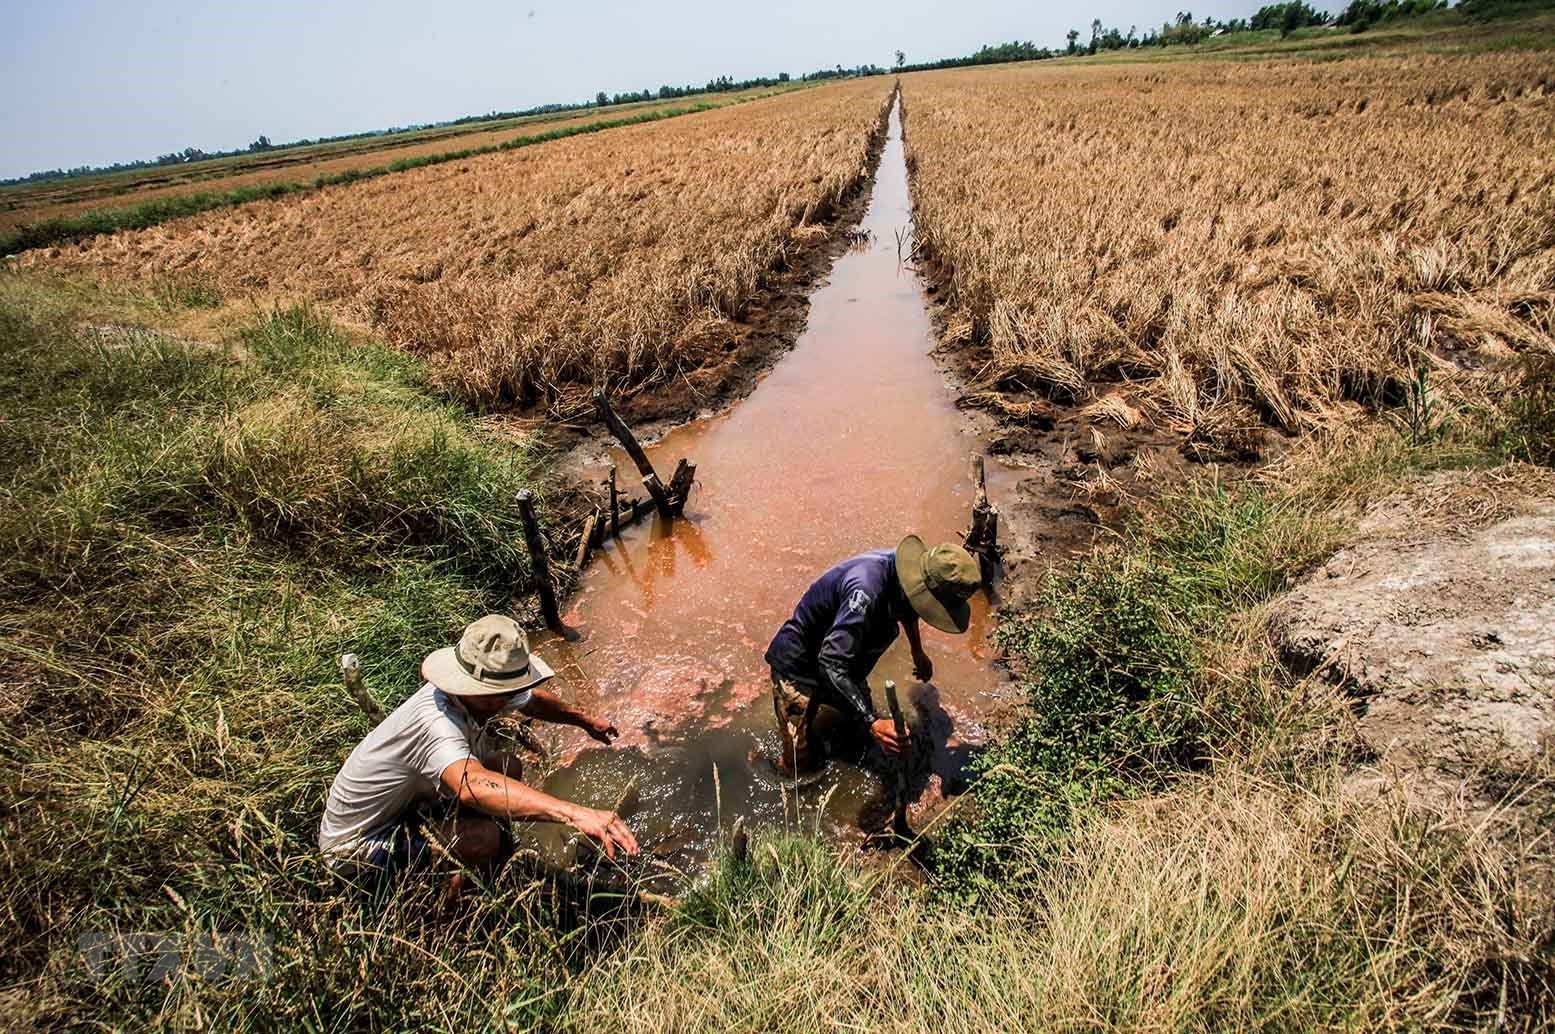 Enhancement of the implementation of measures to prevent and combat heatwaves, droughts, water shortages, and saline intrusion in Vietnam